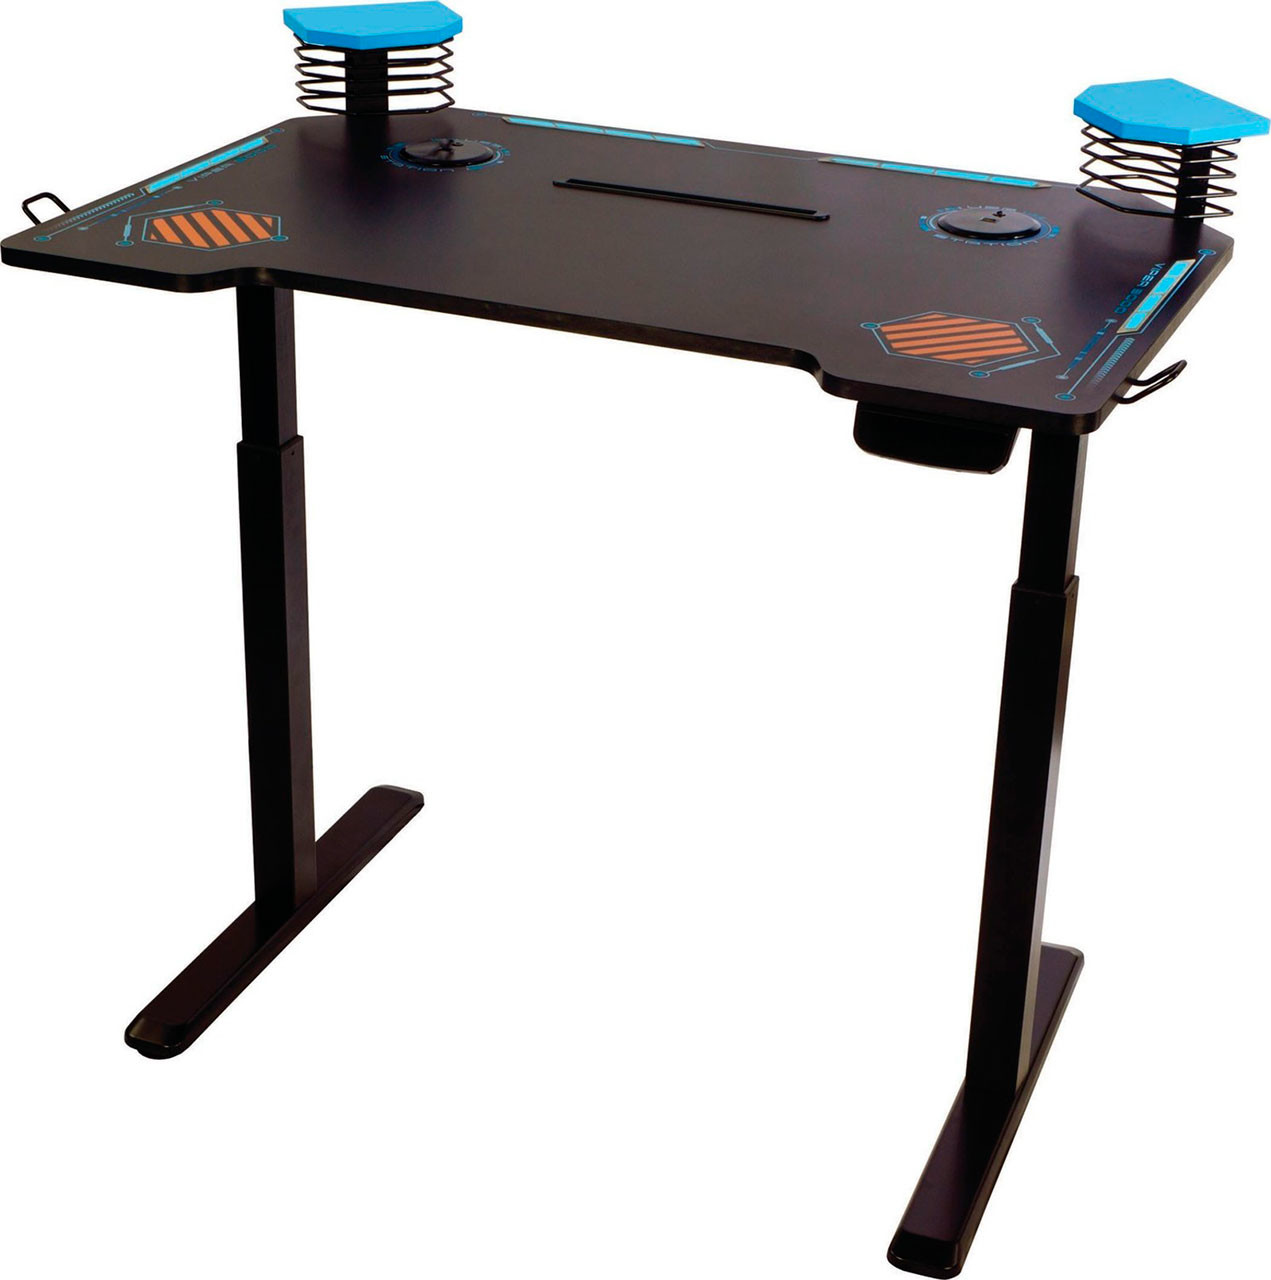 Atlantic Introduces The Viper 3000 Motorized Gaming Desk Techpowerup